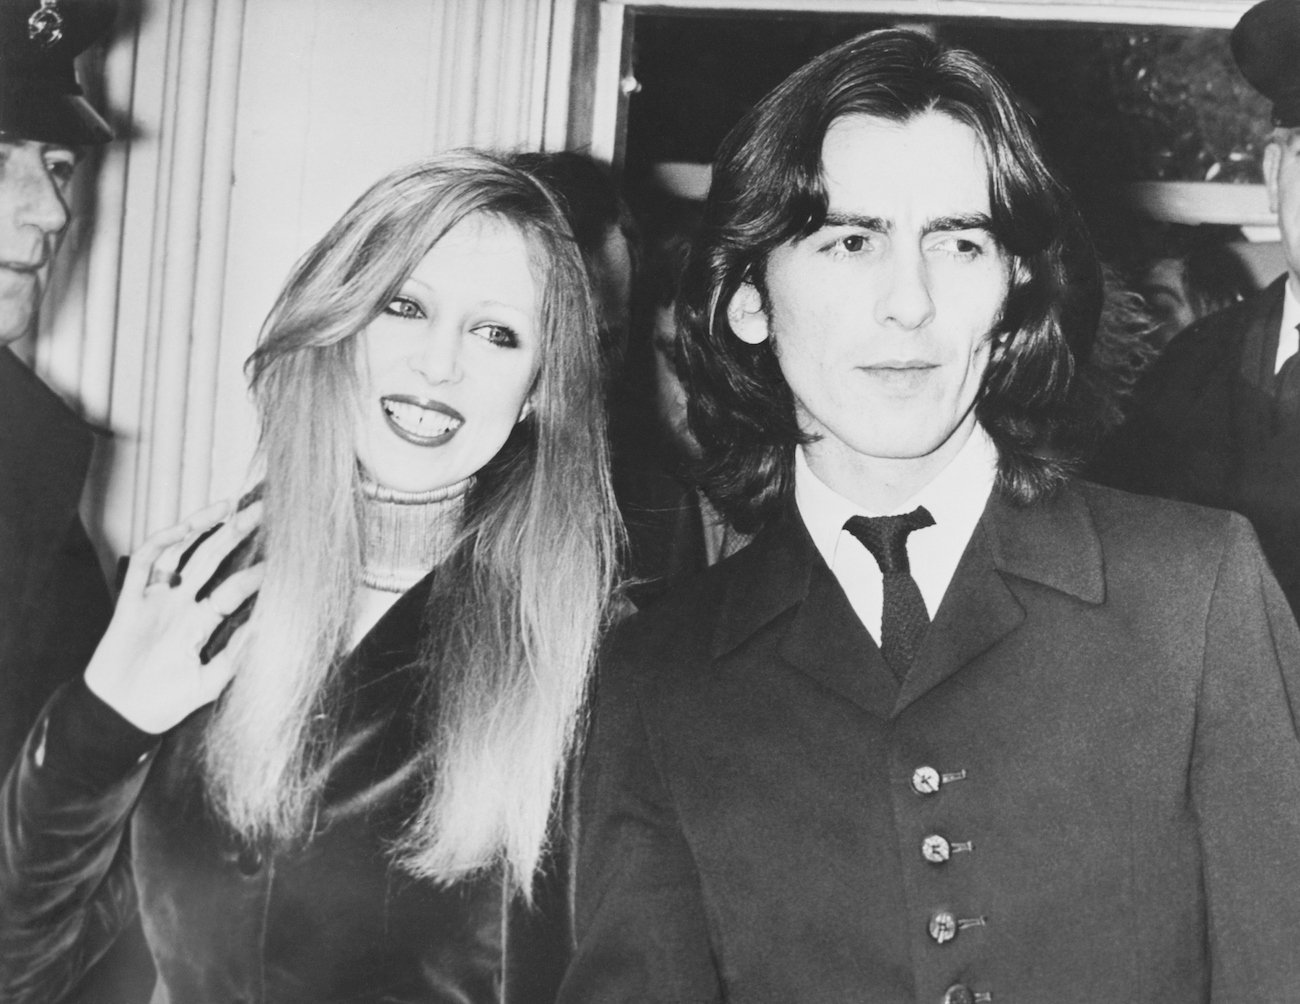 George Harrison and Pattie Boyd leaving a court house in 1969.